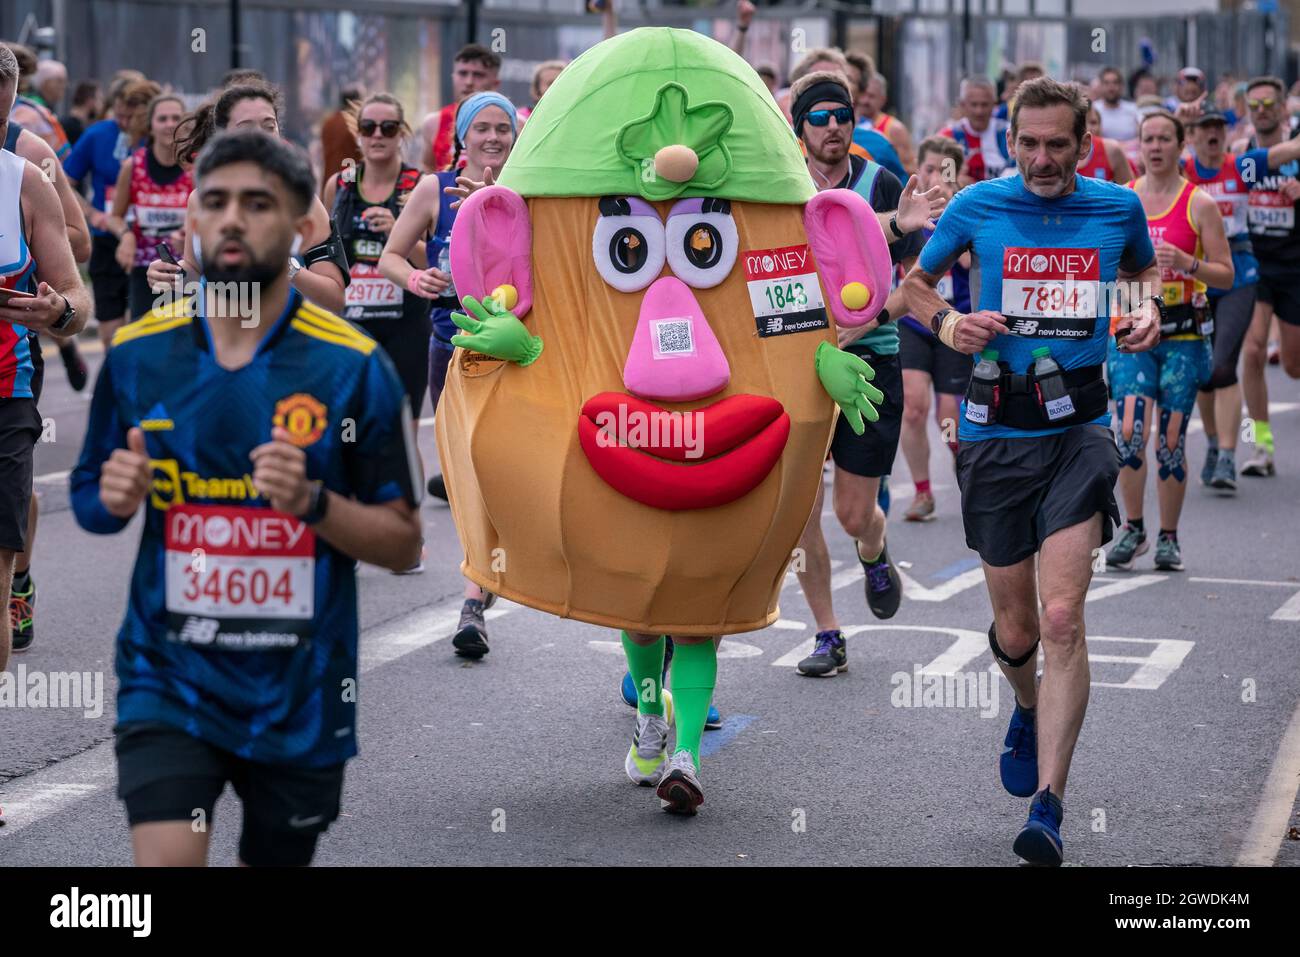 London, UK. 3rd Oct, 2021. Mr Potato Head runner. London Marathon passes down Deptford’s Evelyn Street in South East London, the 8 mile mark of the 26.2 mile course where runners are greeted and cheered on by local residents. Up to 40,000 are expected to run with thousands joining virtually in what could be the biggest race in history. The event, which is now in its fifth decade, has helped raise more than £1bn for charities since it was first held in 1981. Credit: Guy Corbishley/Alamy Live News Stock Photo